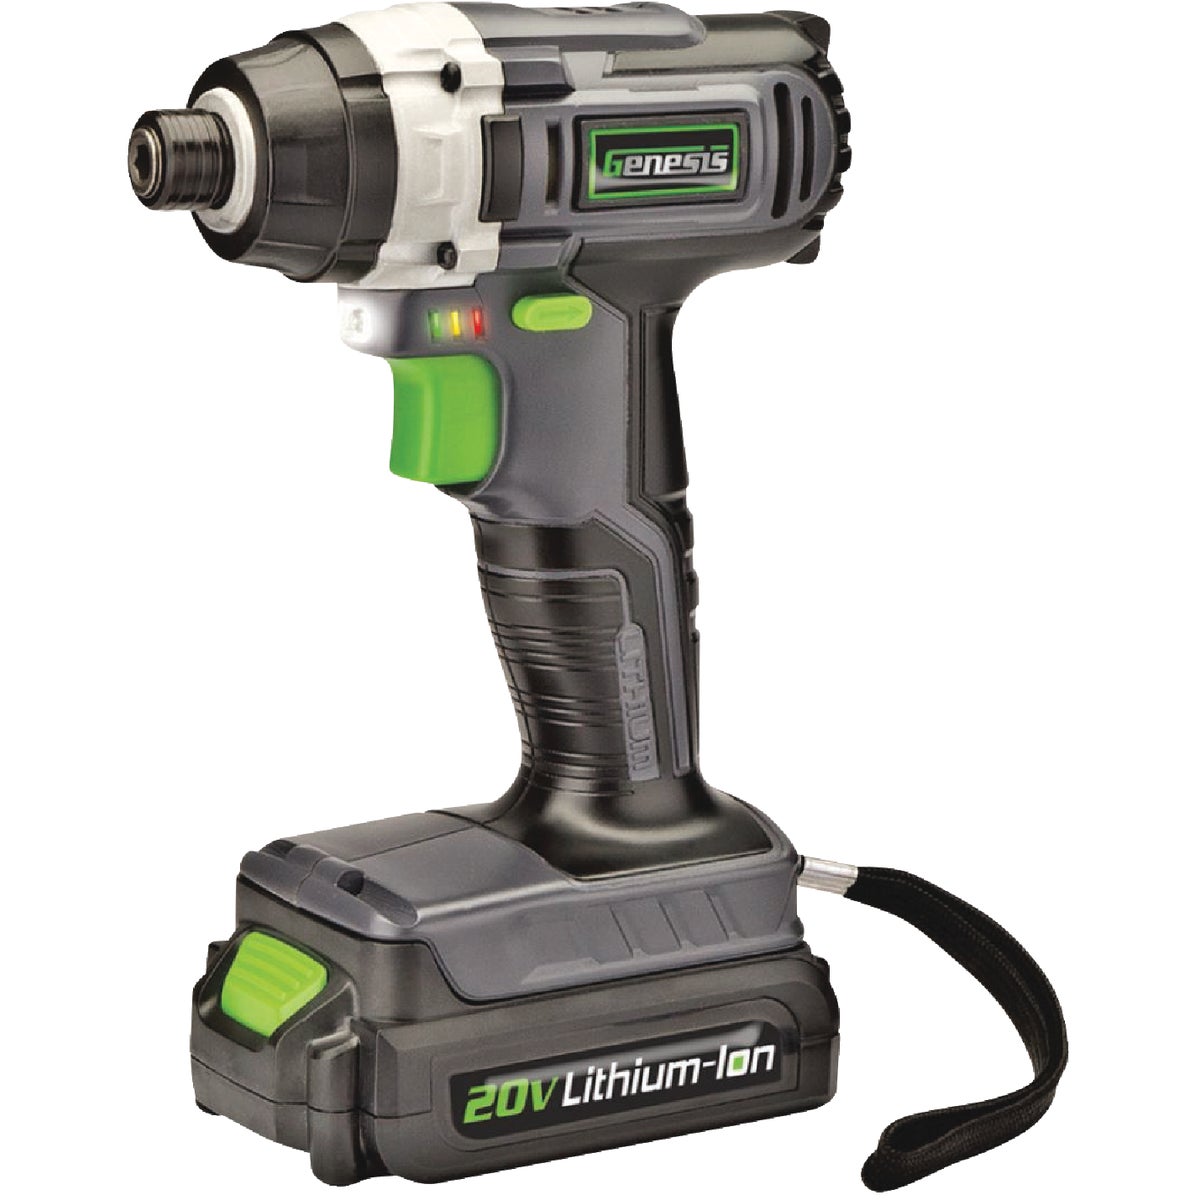 Genesis 20-Volt Lithium-Ion 1/4 In. Hex Cordless Impact Driver Kit